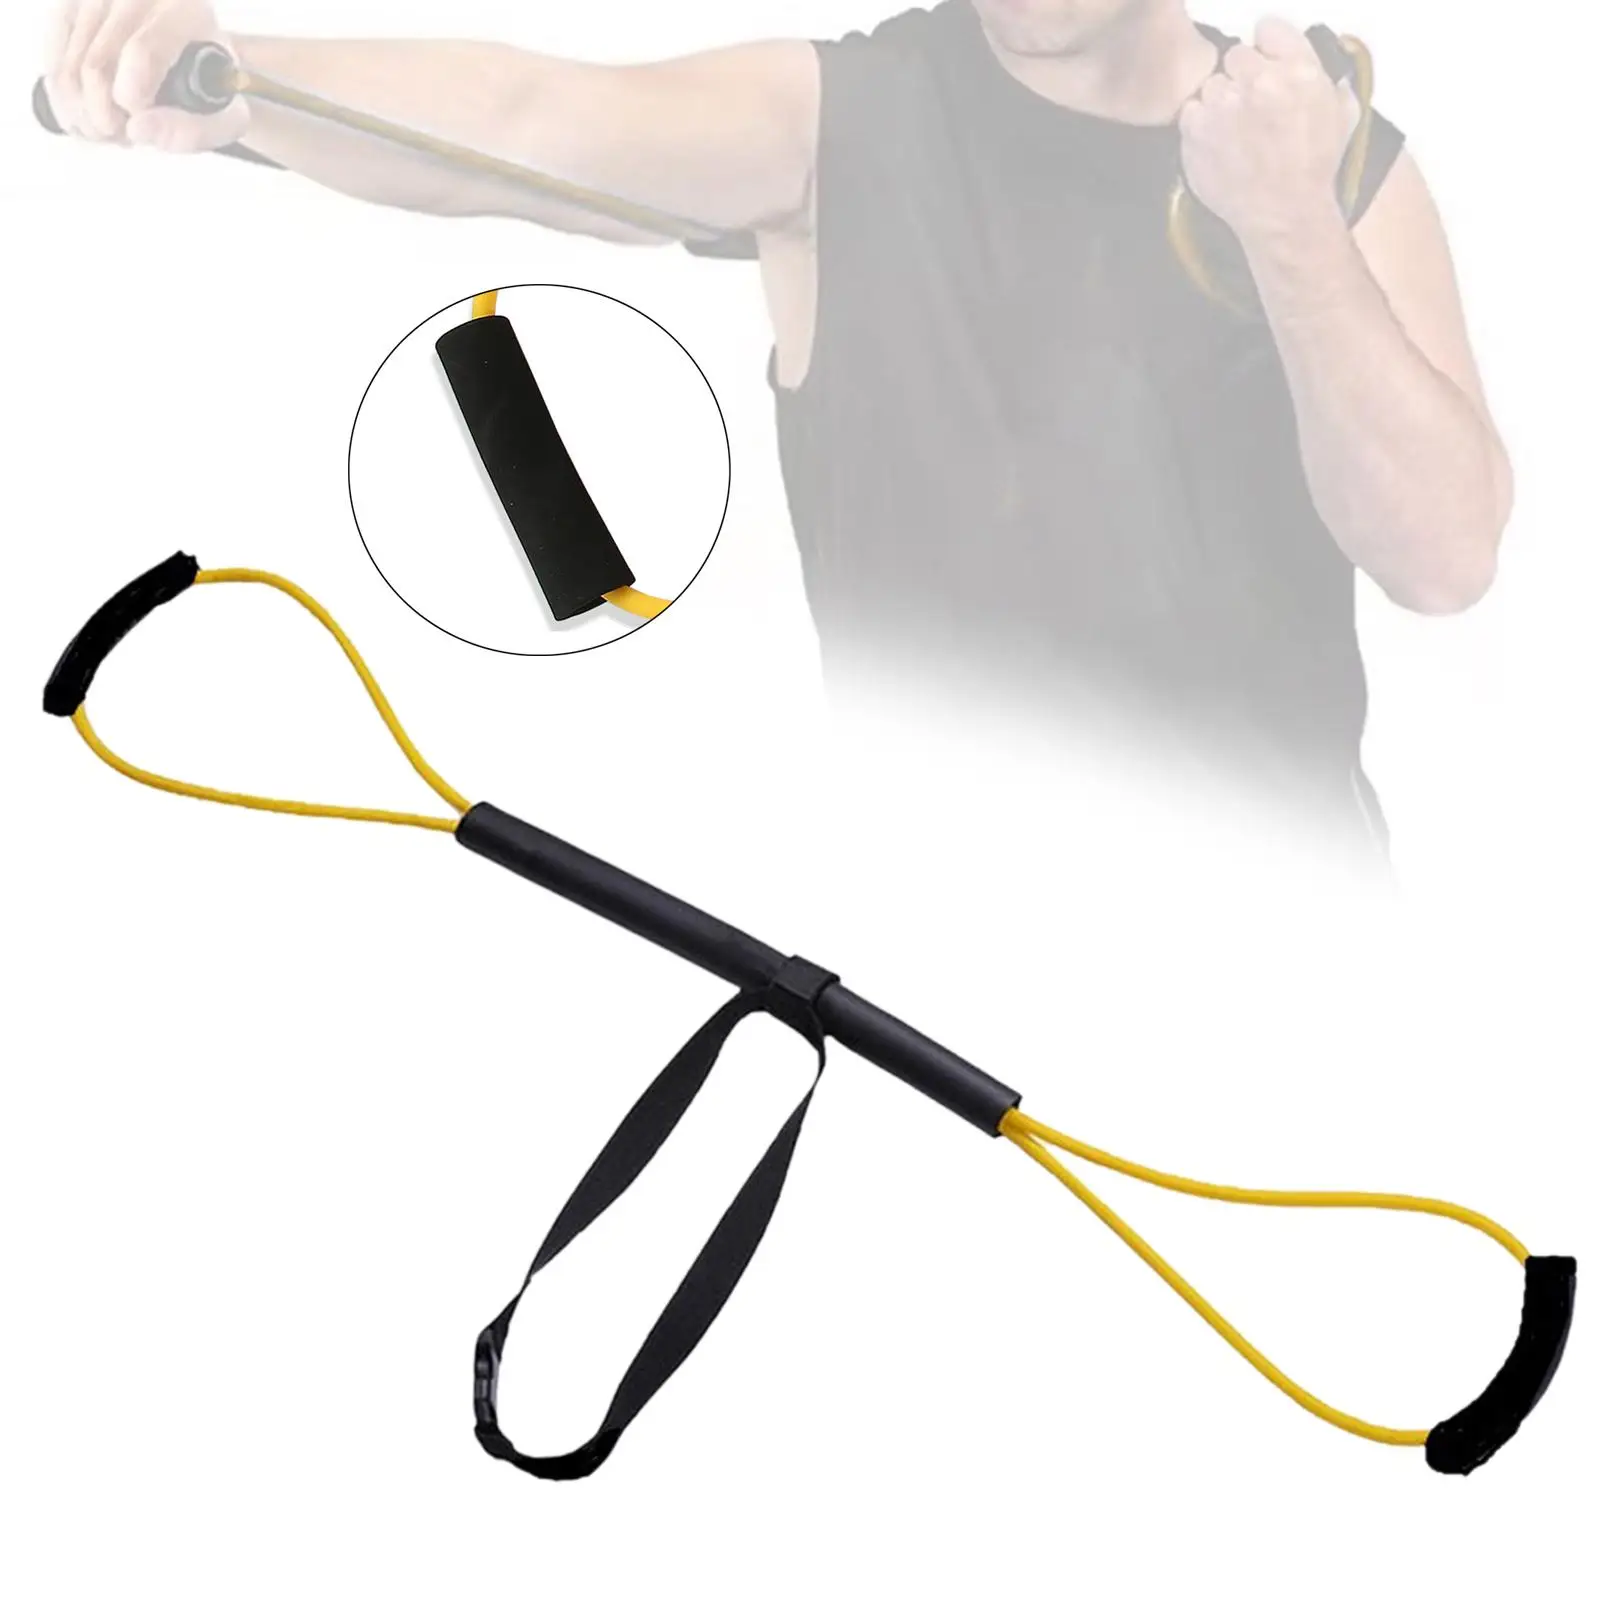 Exercise Bands Boxing Bands Pulling Rope Punching Equipment Boxing Equipment